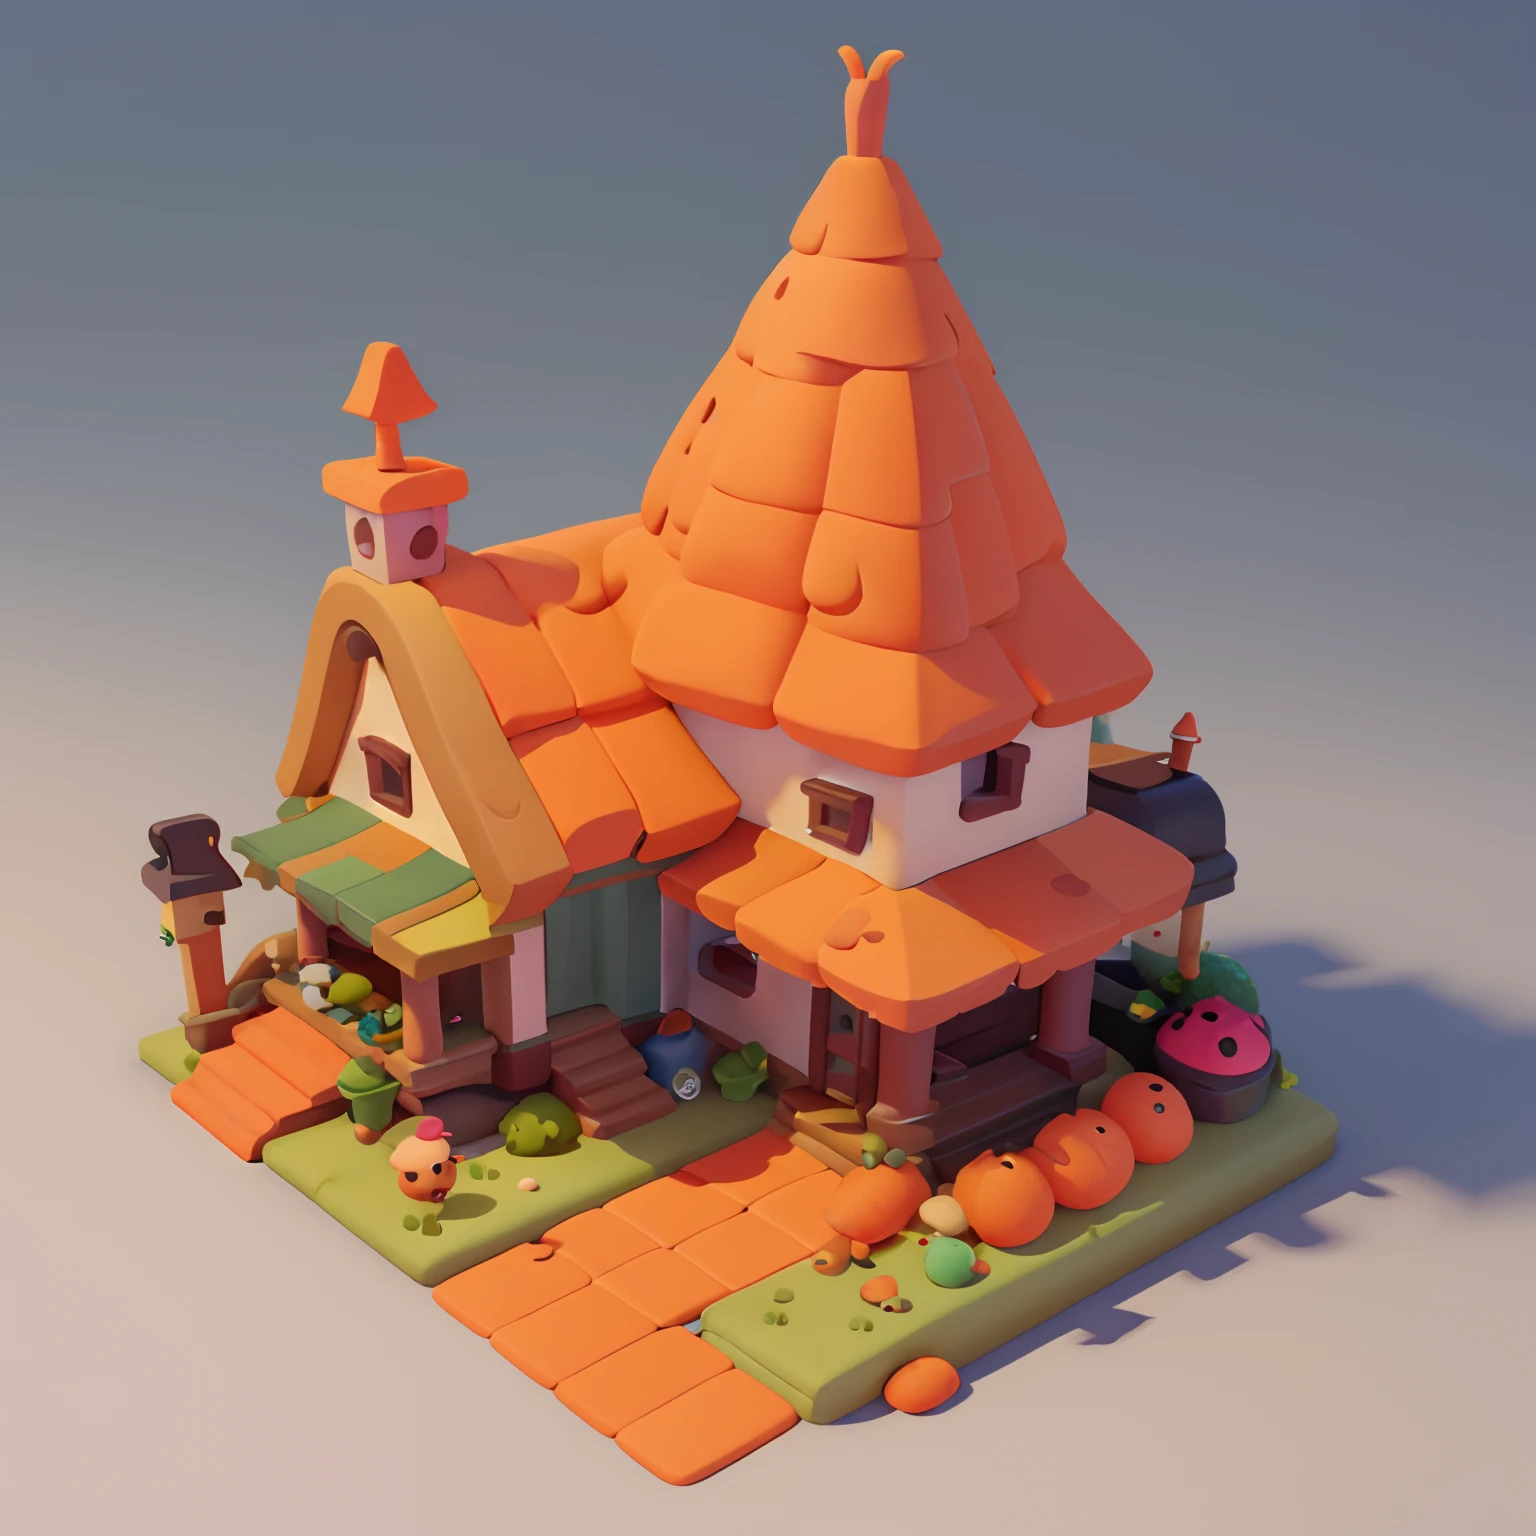 Game architectural design, Cartoony,Carrot House，Radishes match the architecture，casual game style, Carrot building,C4D，closeup cleavage，tmasterpiece，super detailing，best qualtiy